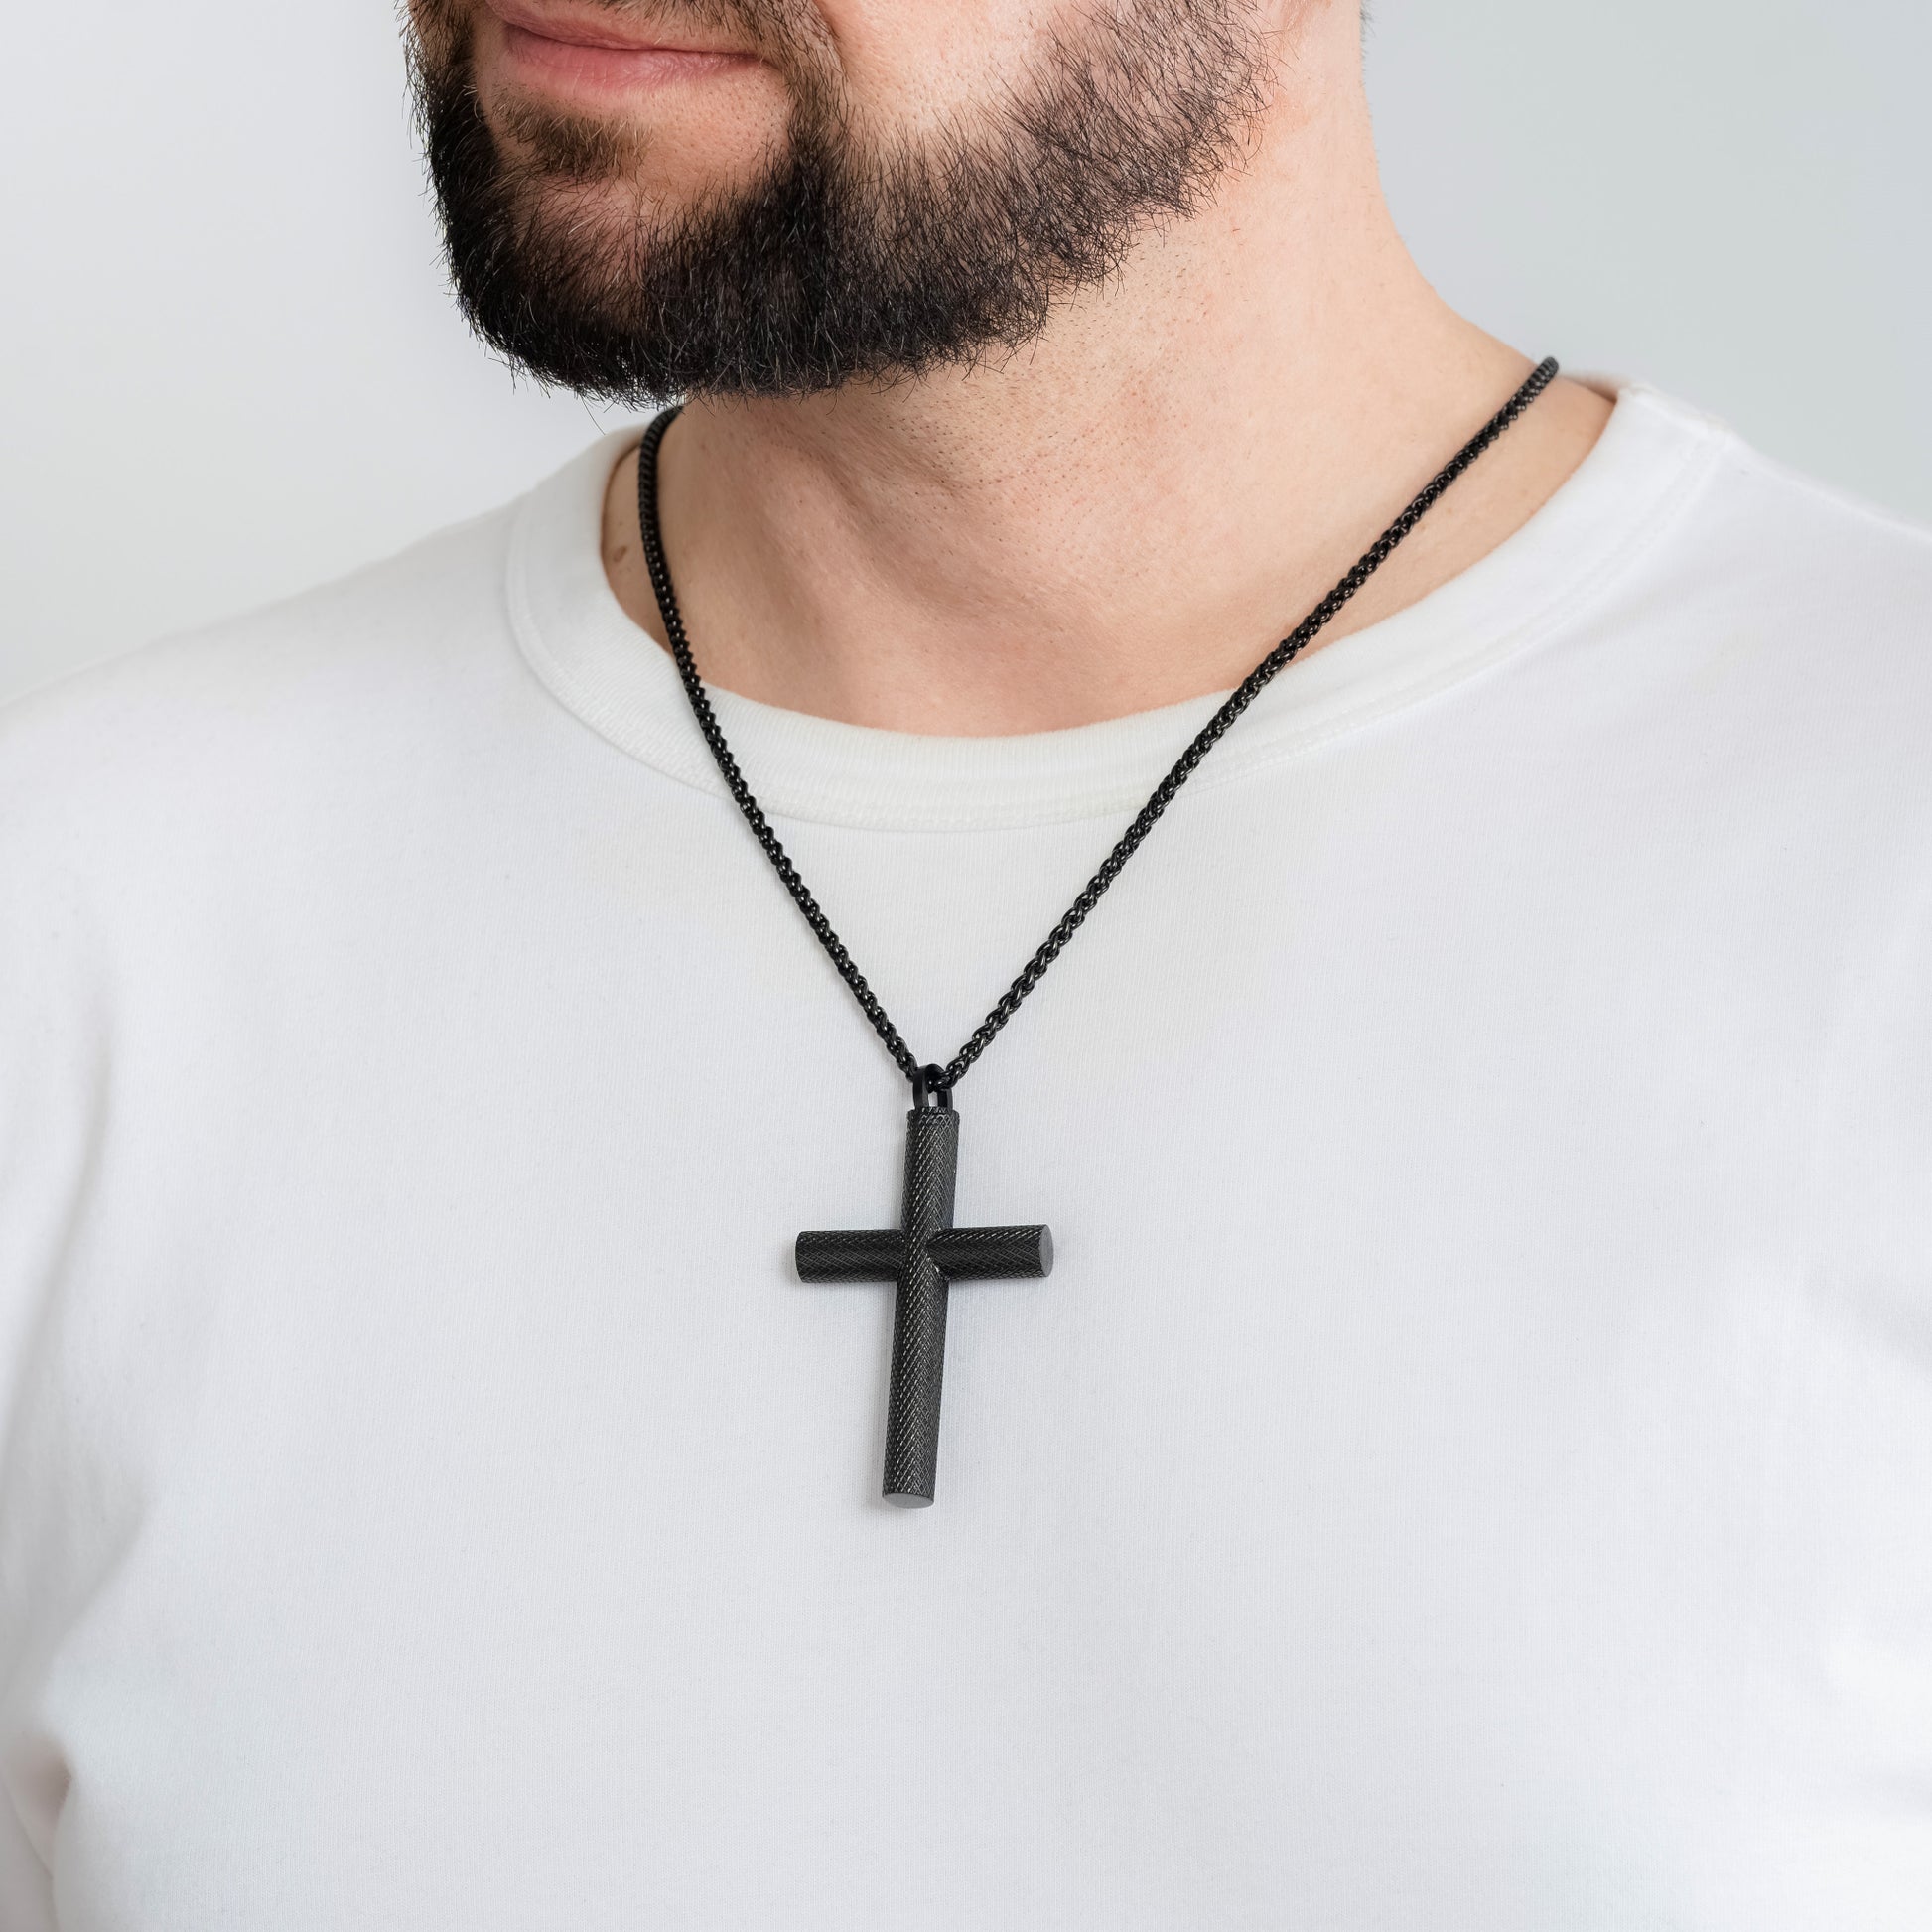 A male model in a white t-shirt wearing a Bison Cross Black Self-fill Pendant with a 3mm Black Spiga chain 24 inches.